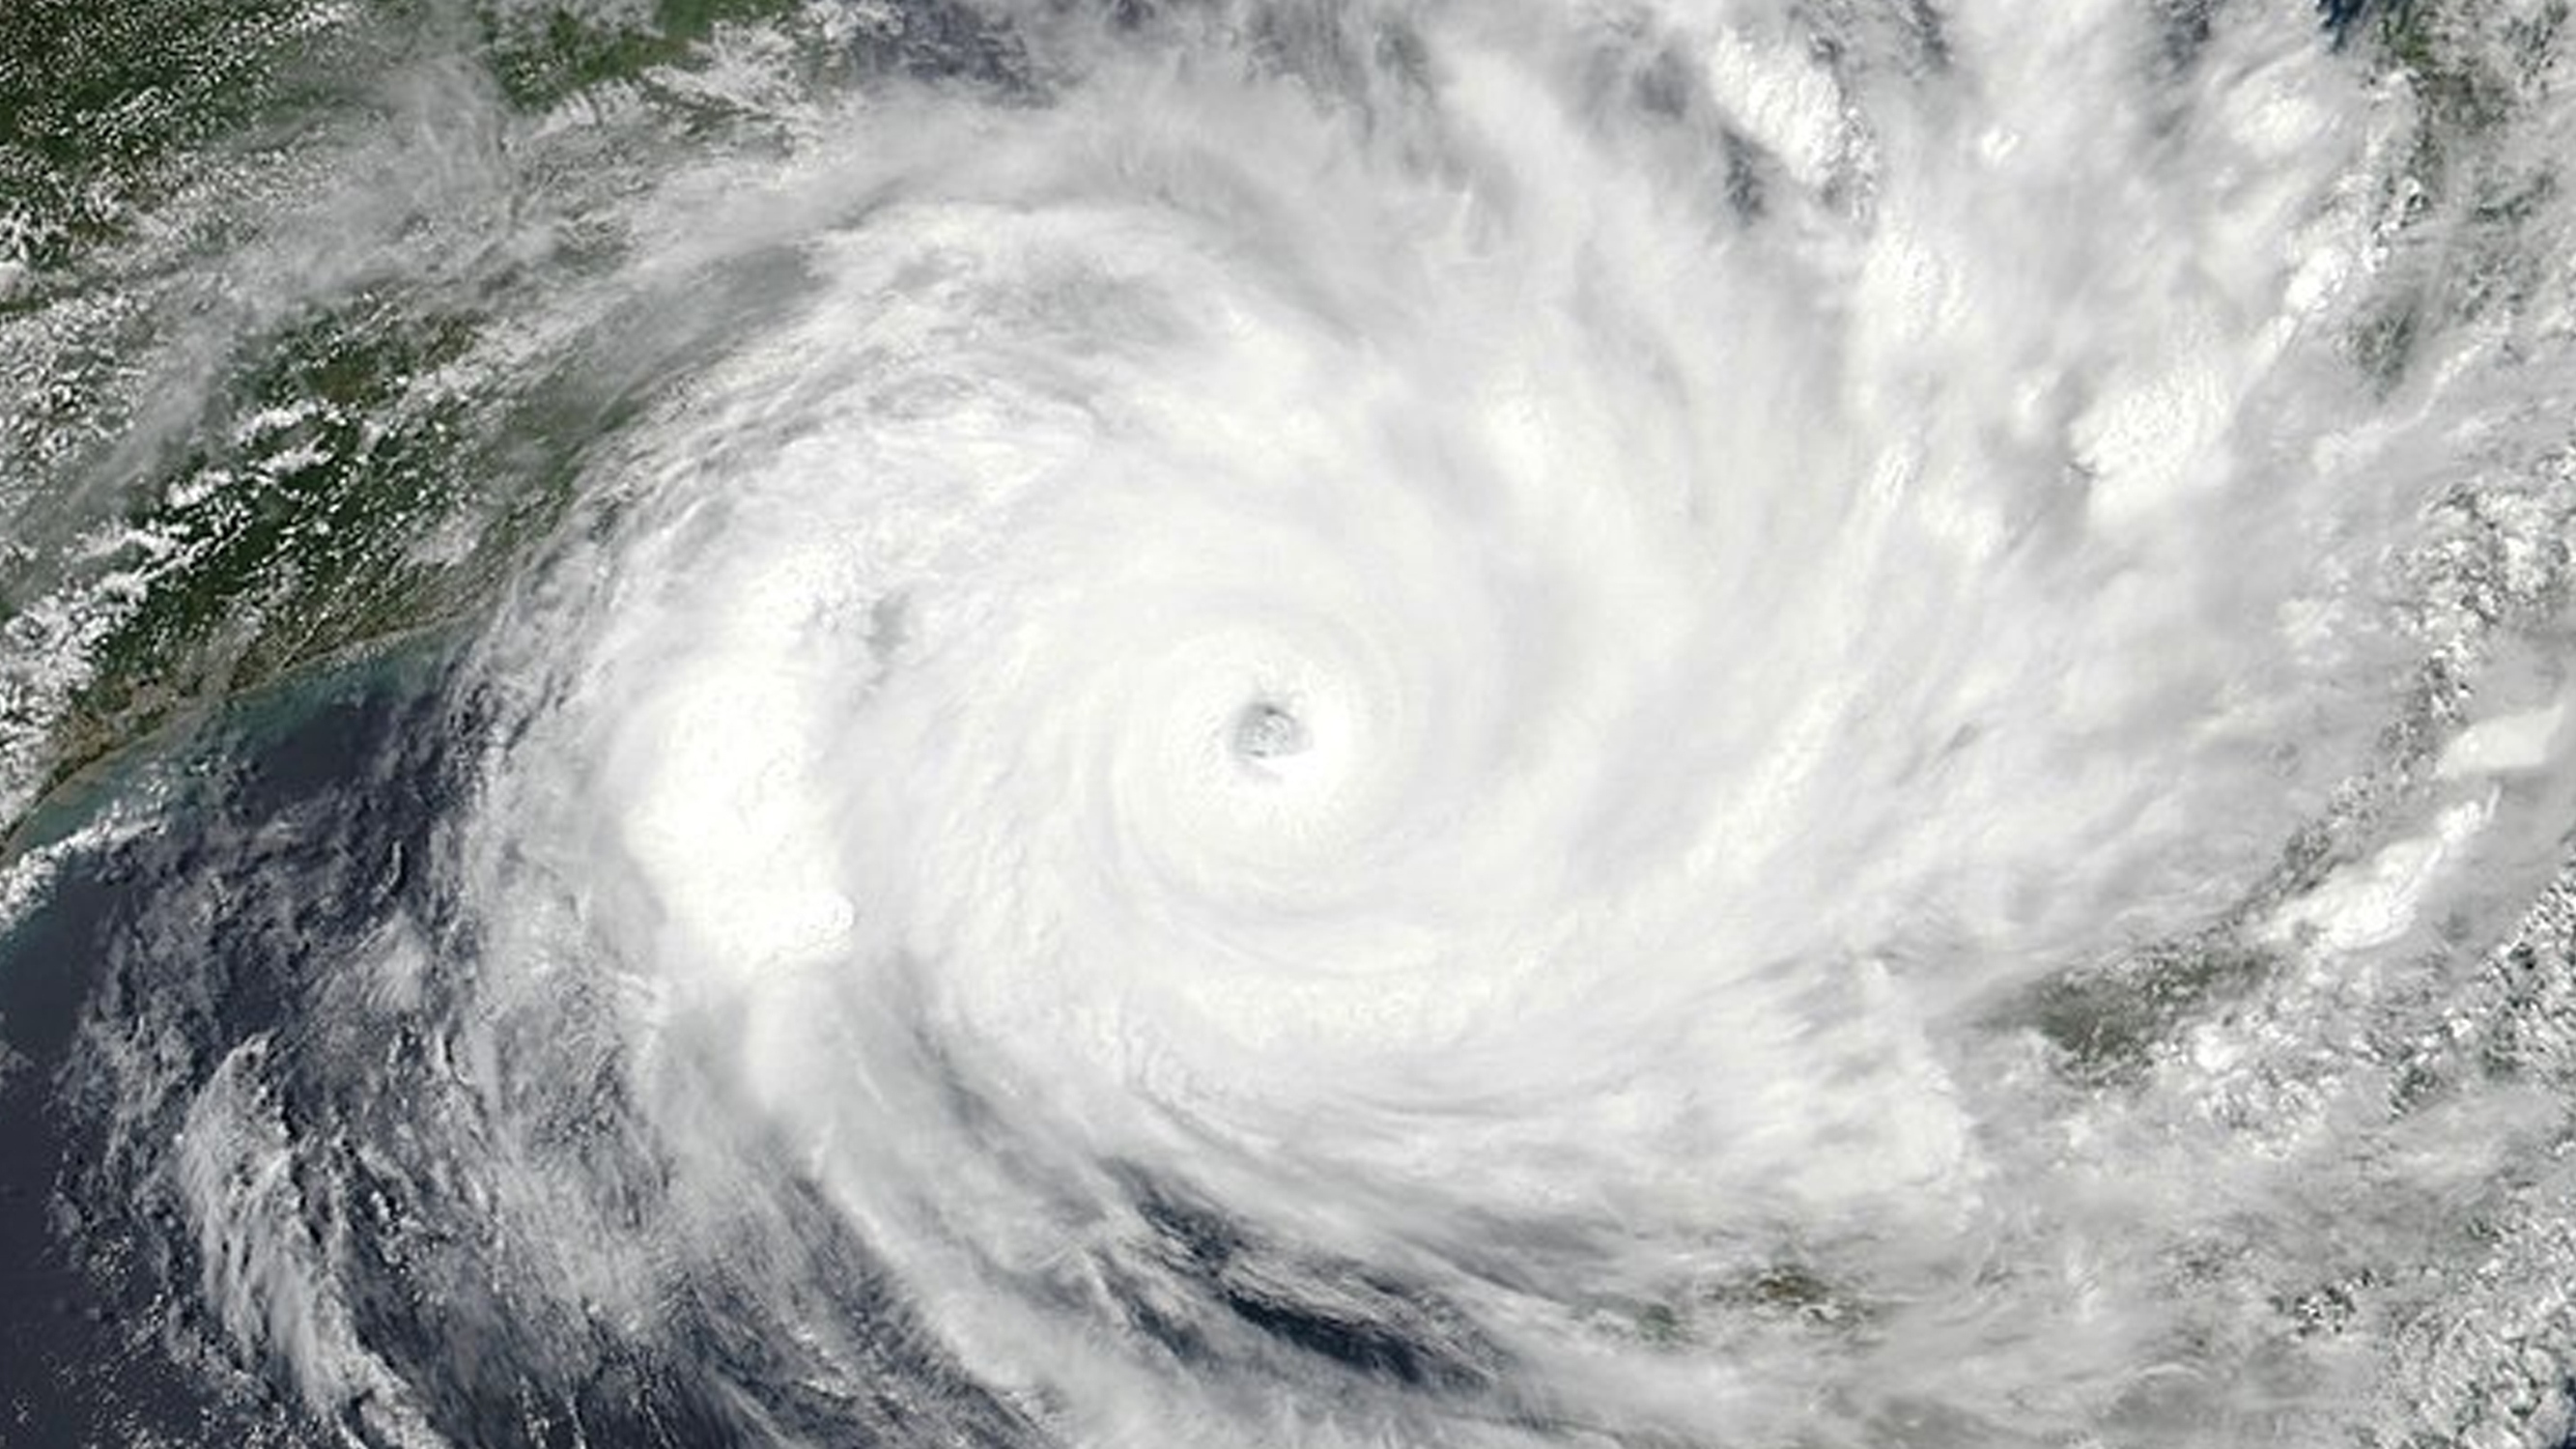 Intense Tropical Cyclone Idai at its initial peak intensity on March 11, 2019